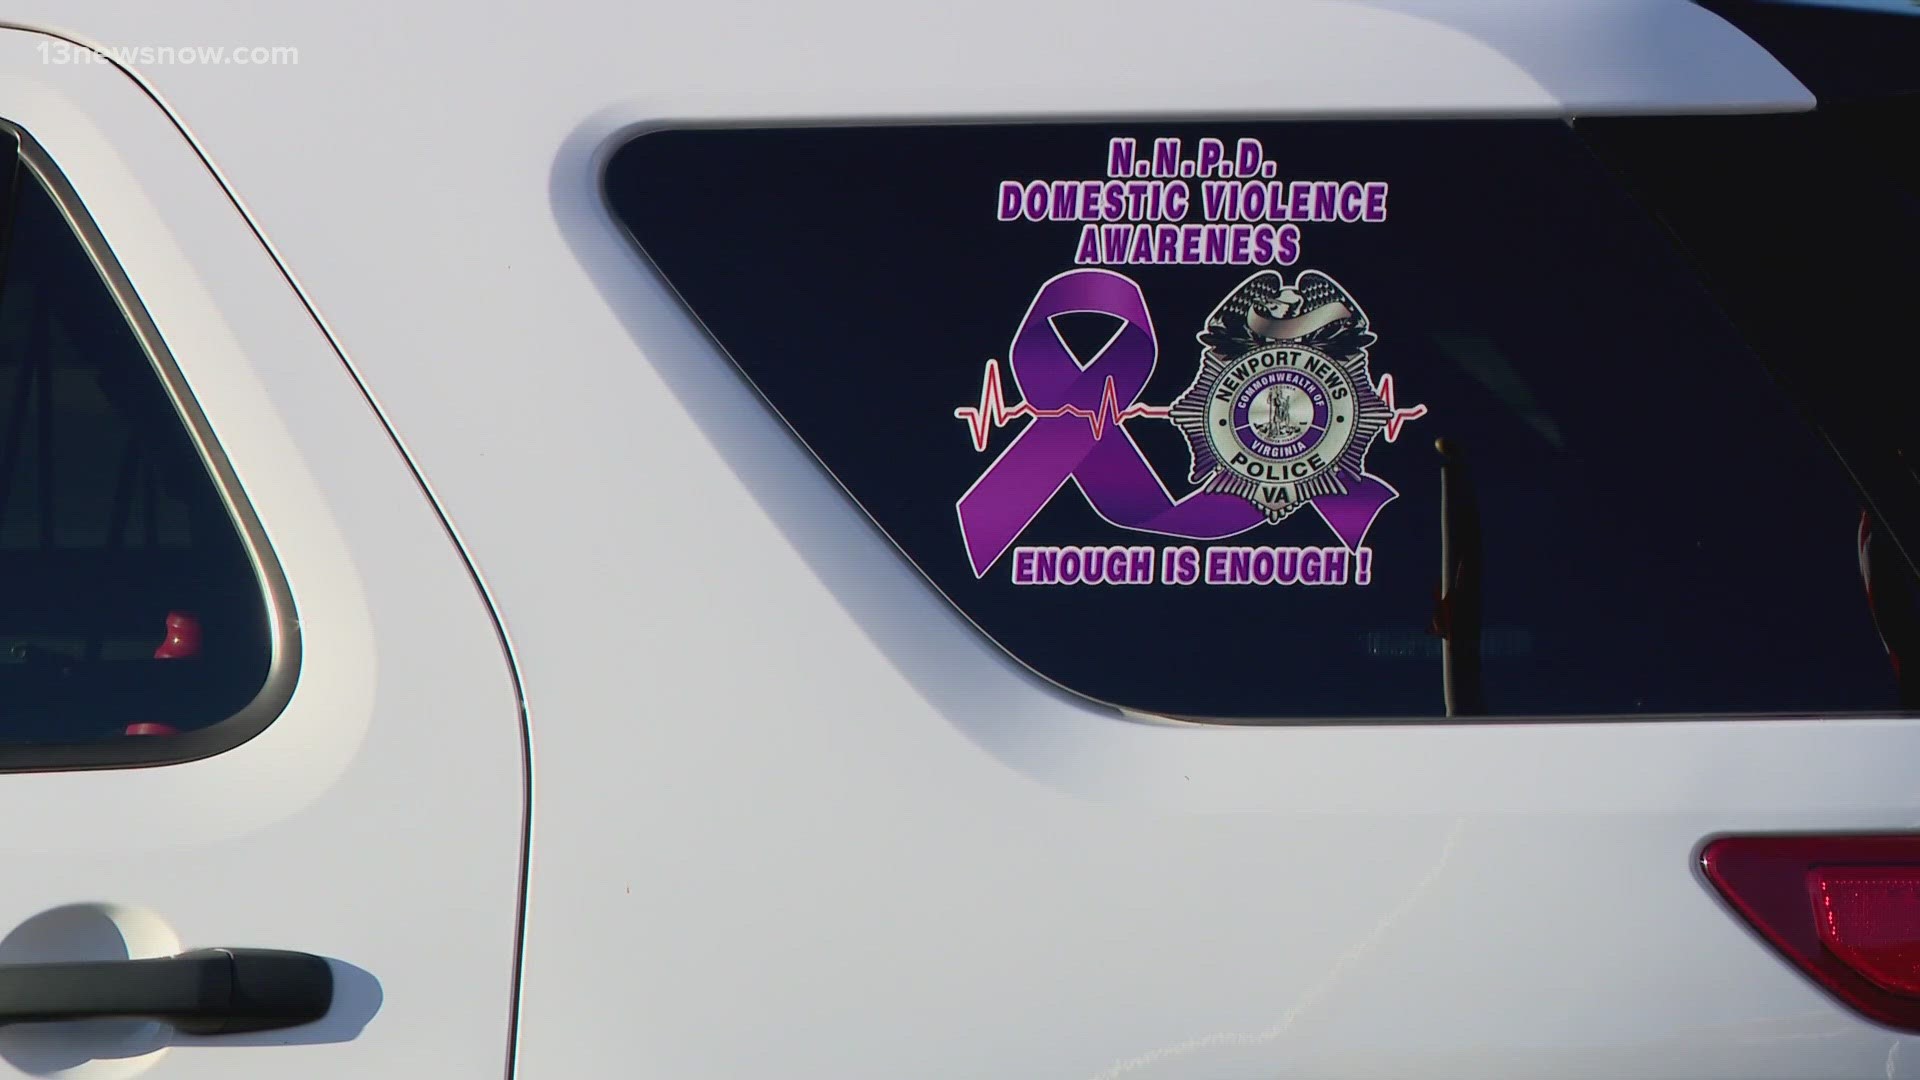 They're marking an early start to Domestic Violence Awareness Month with an event outside of police headquarters.